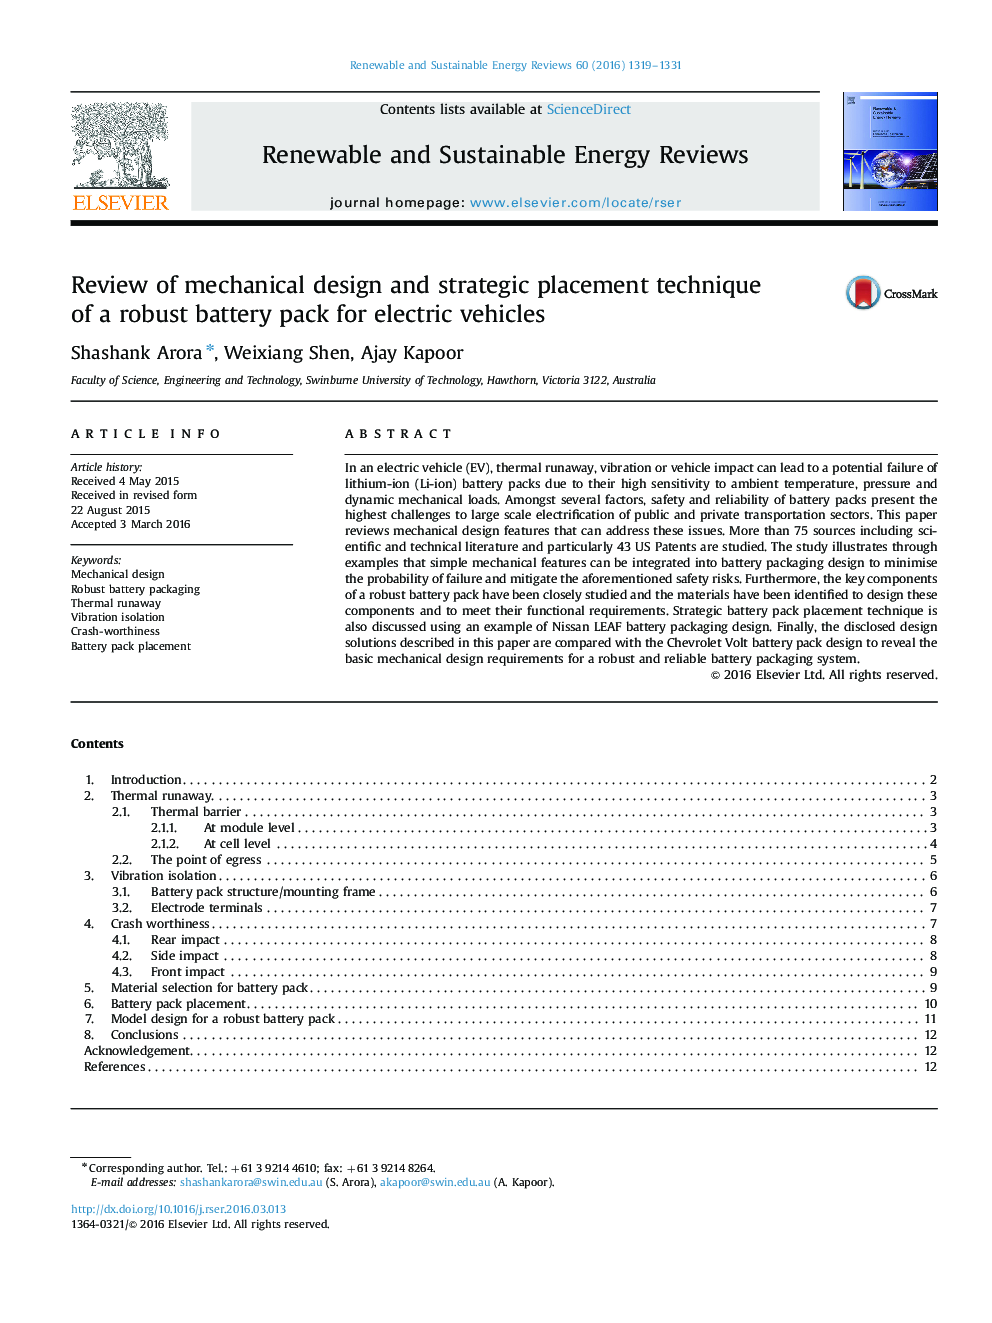 Review of mechanical design and strategic placement technique of a robust battery pack for electric vehicles